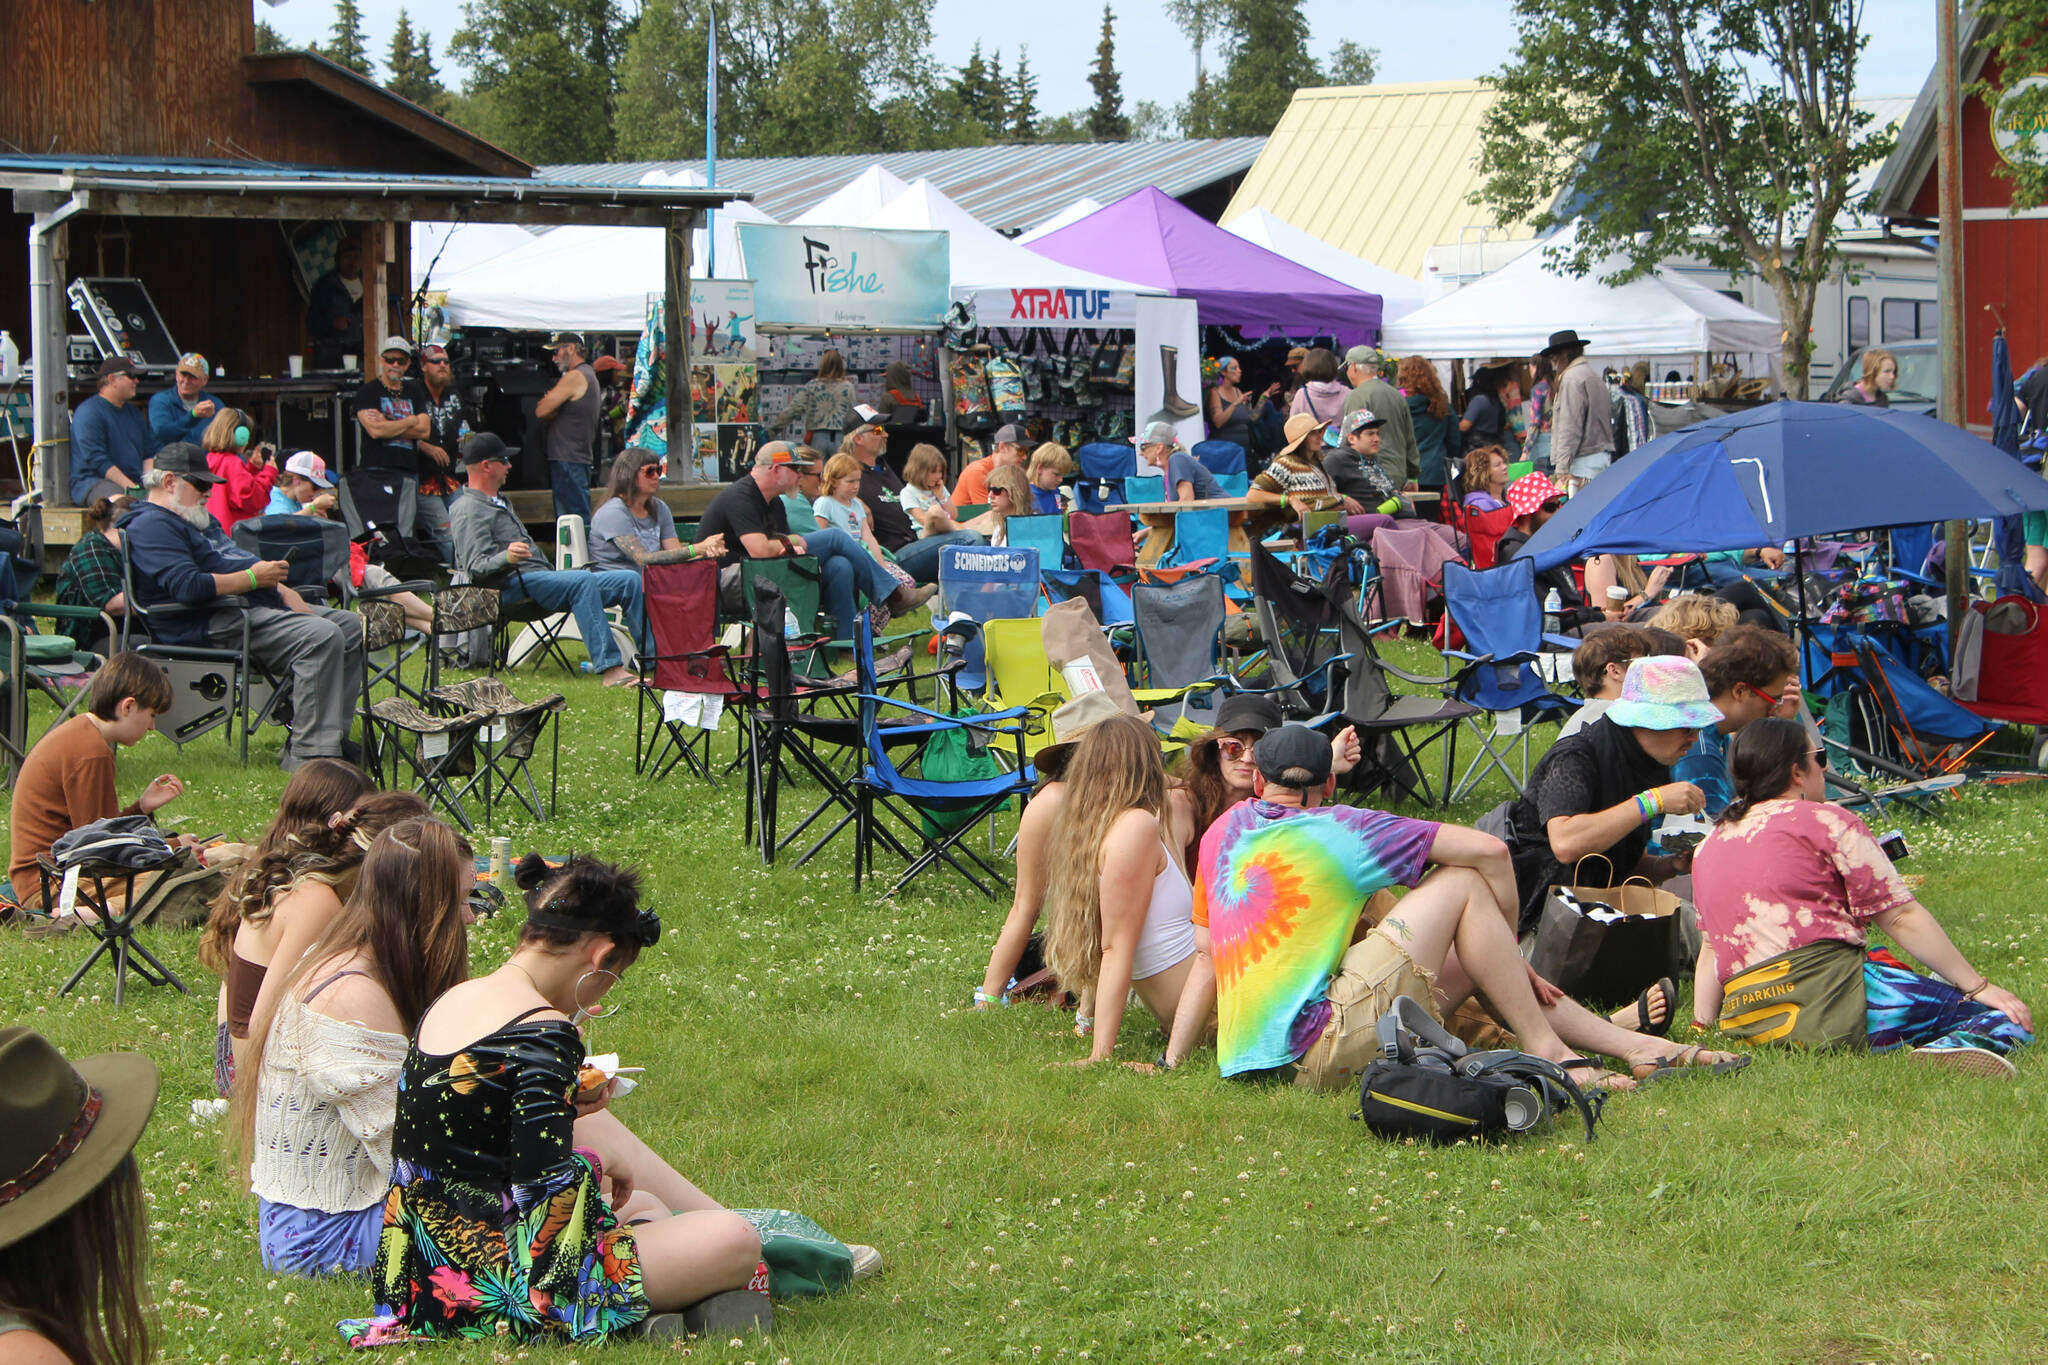 Salmonfest attendees listen to music at the Ocean Stage on Friday, Aug. 4, 2023 in Ninilchik, Alaska. (Ashlyn O’Hara/Peninsula Clarion)